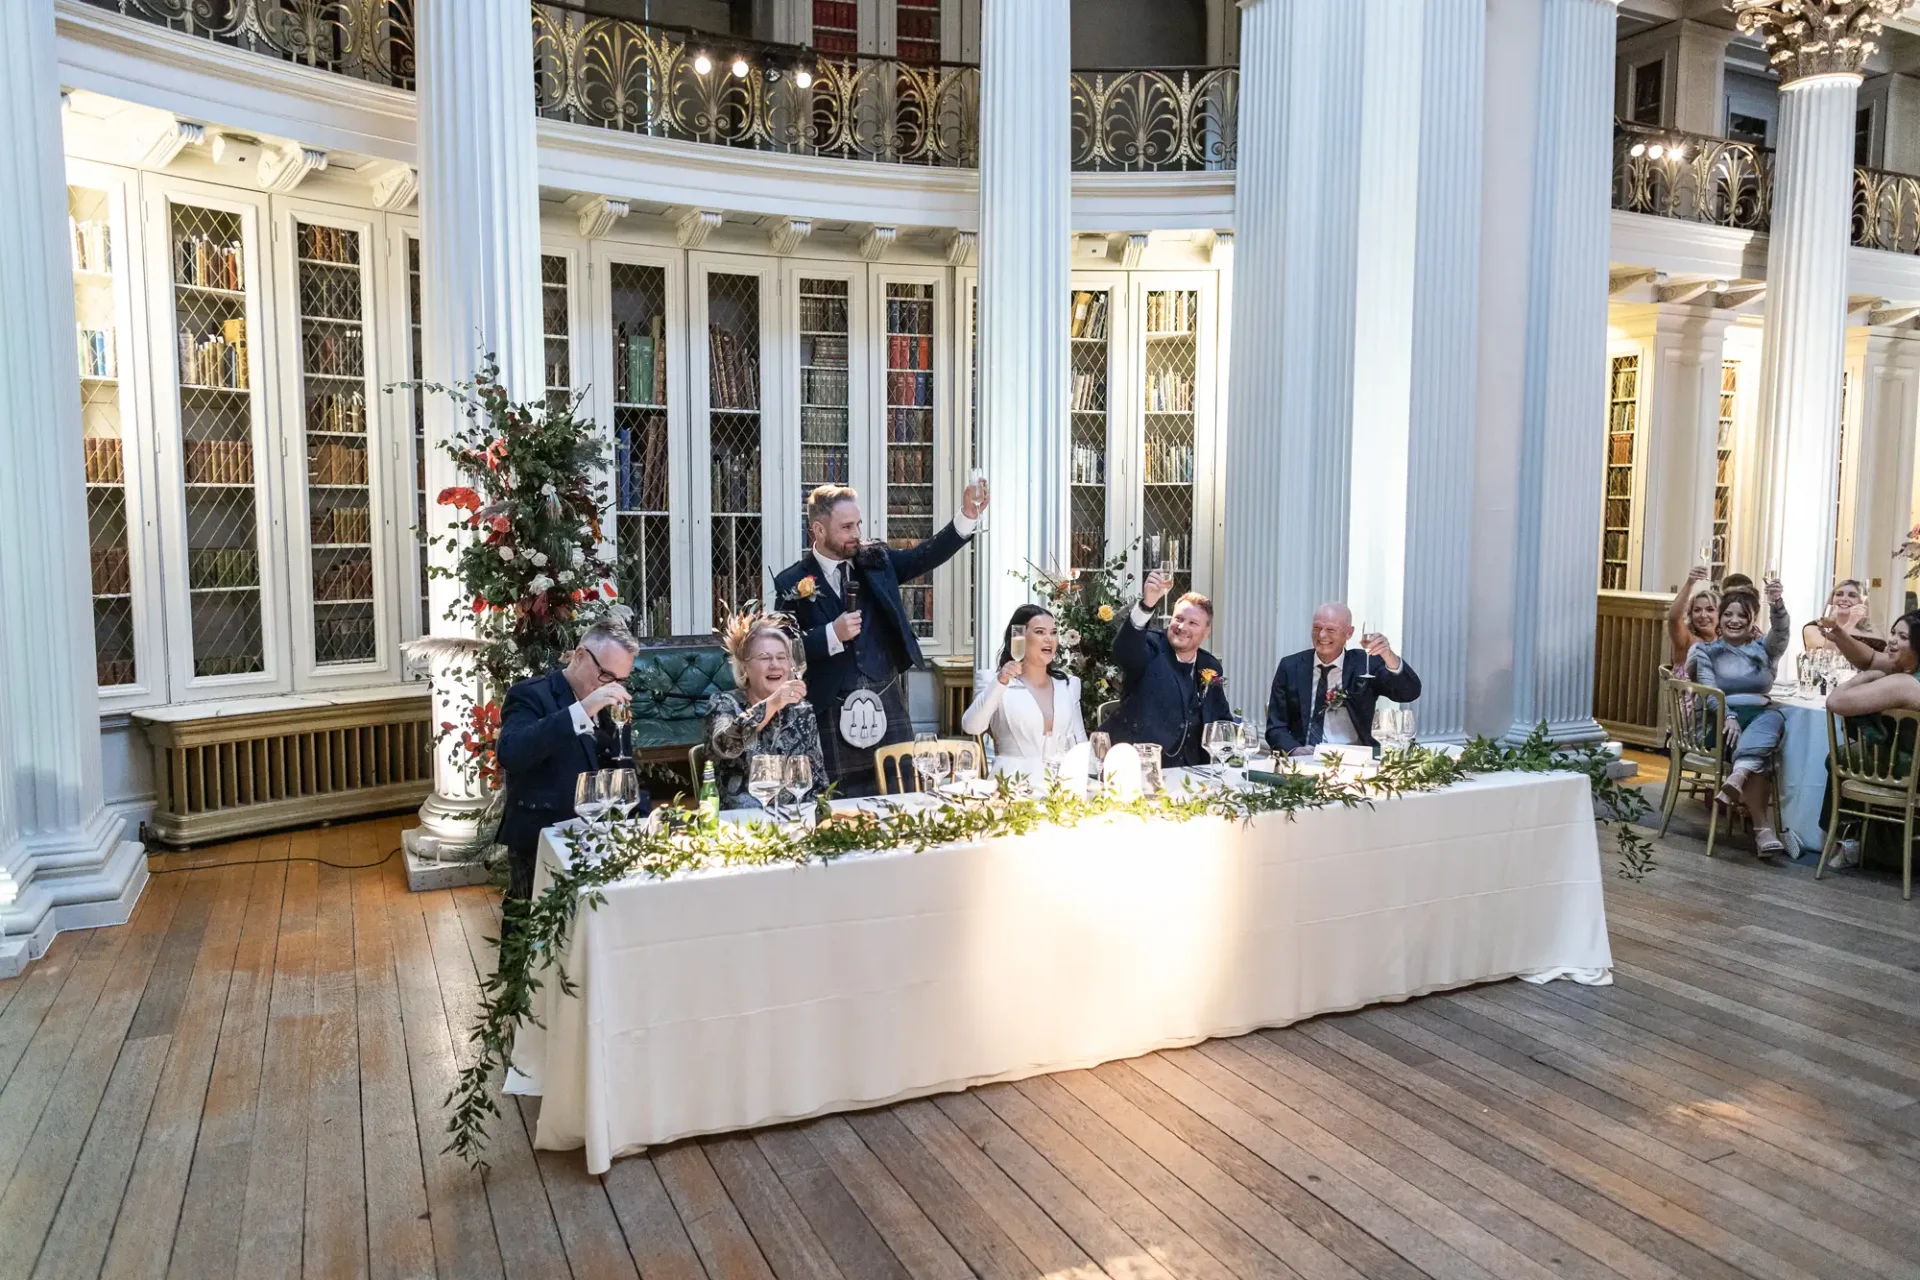 A wedding reception in an elegant hall with guests watching as a man standing gestures joyfully at the head table.